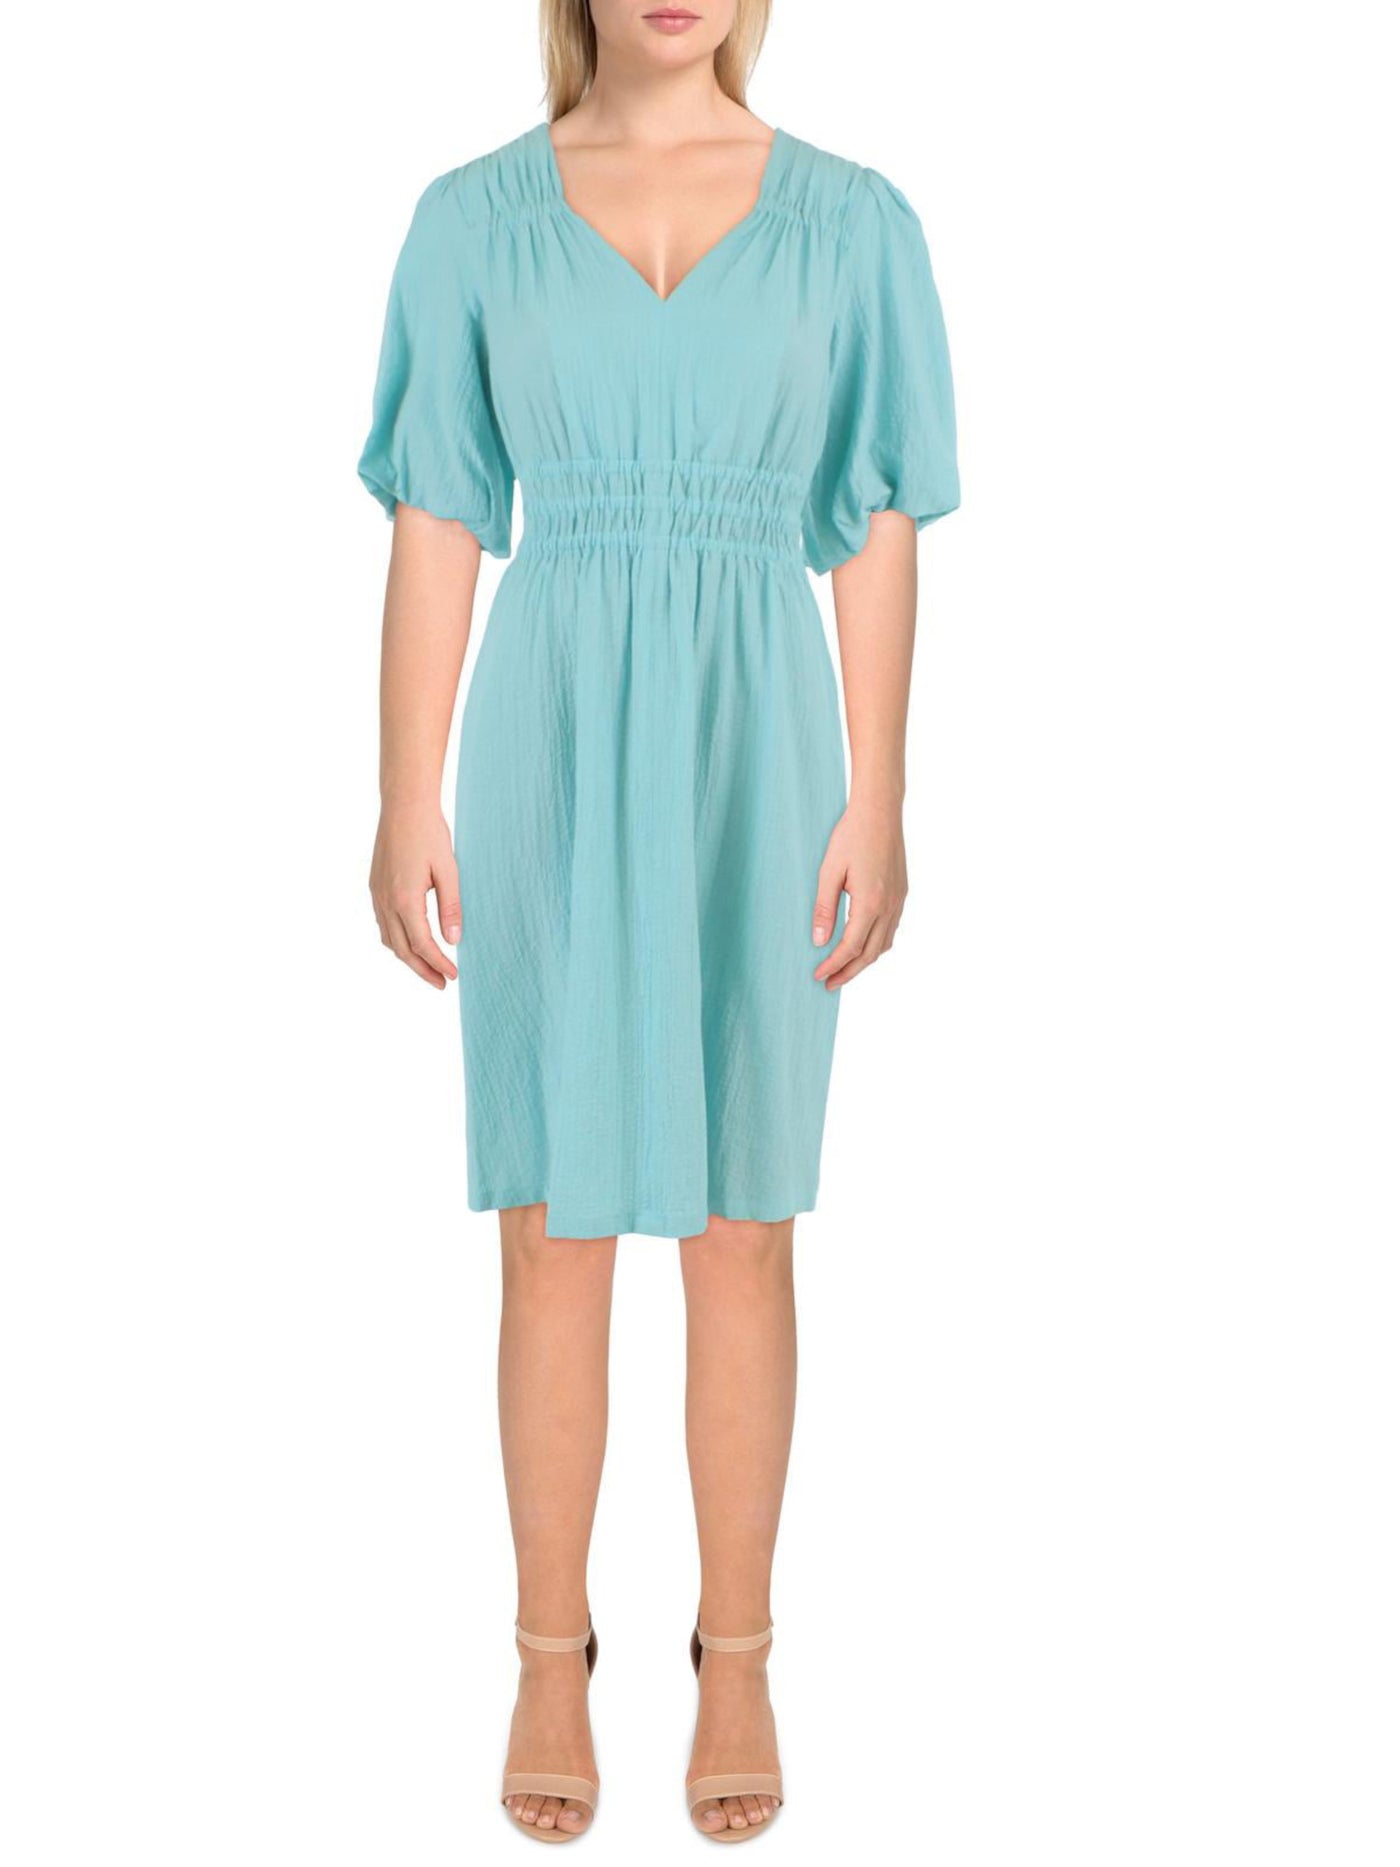 CALVIN KLEIN Womens Aqua Textured Smocked Pullover Pouf Sleeve V Neck Above The Knee Fit + Flare Dress 12